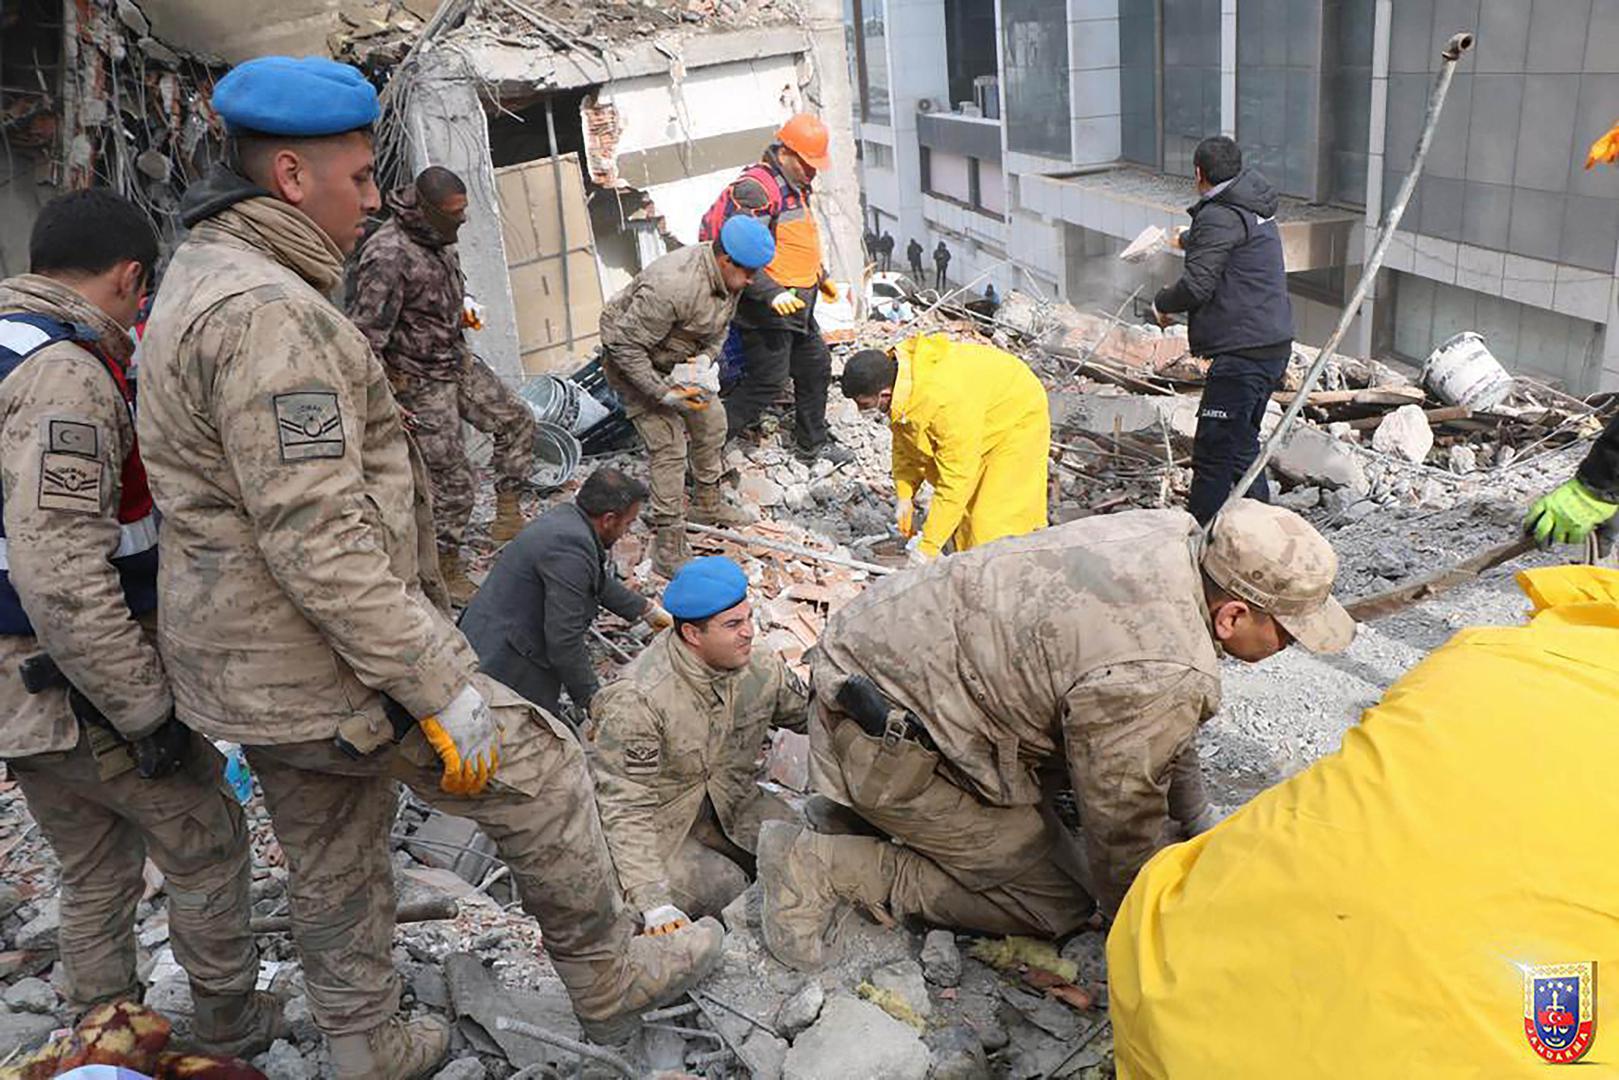 Search and rescue teams are working in the ruins of collapsed buildings in Hatay, south Turkey, February 7, 2023. A powerful earthquake has hit a wide area in south-eastern Turkey, near the Syrian border, killing more than 7000 people and trapping many others. Photo by Cem Bakirci/Depo Photos/ABACAPRESS.COM Photo: Depo Photos/ABACA/ABACA